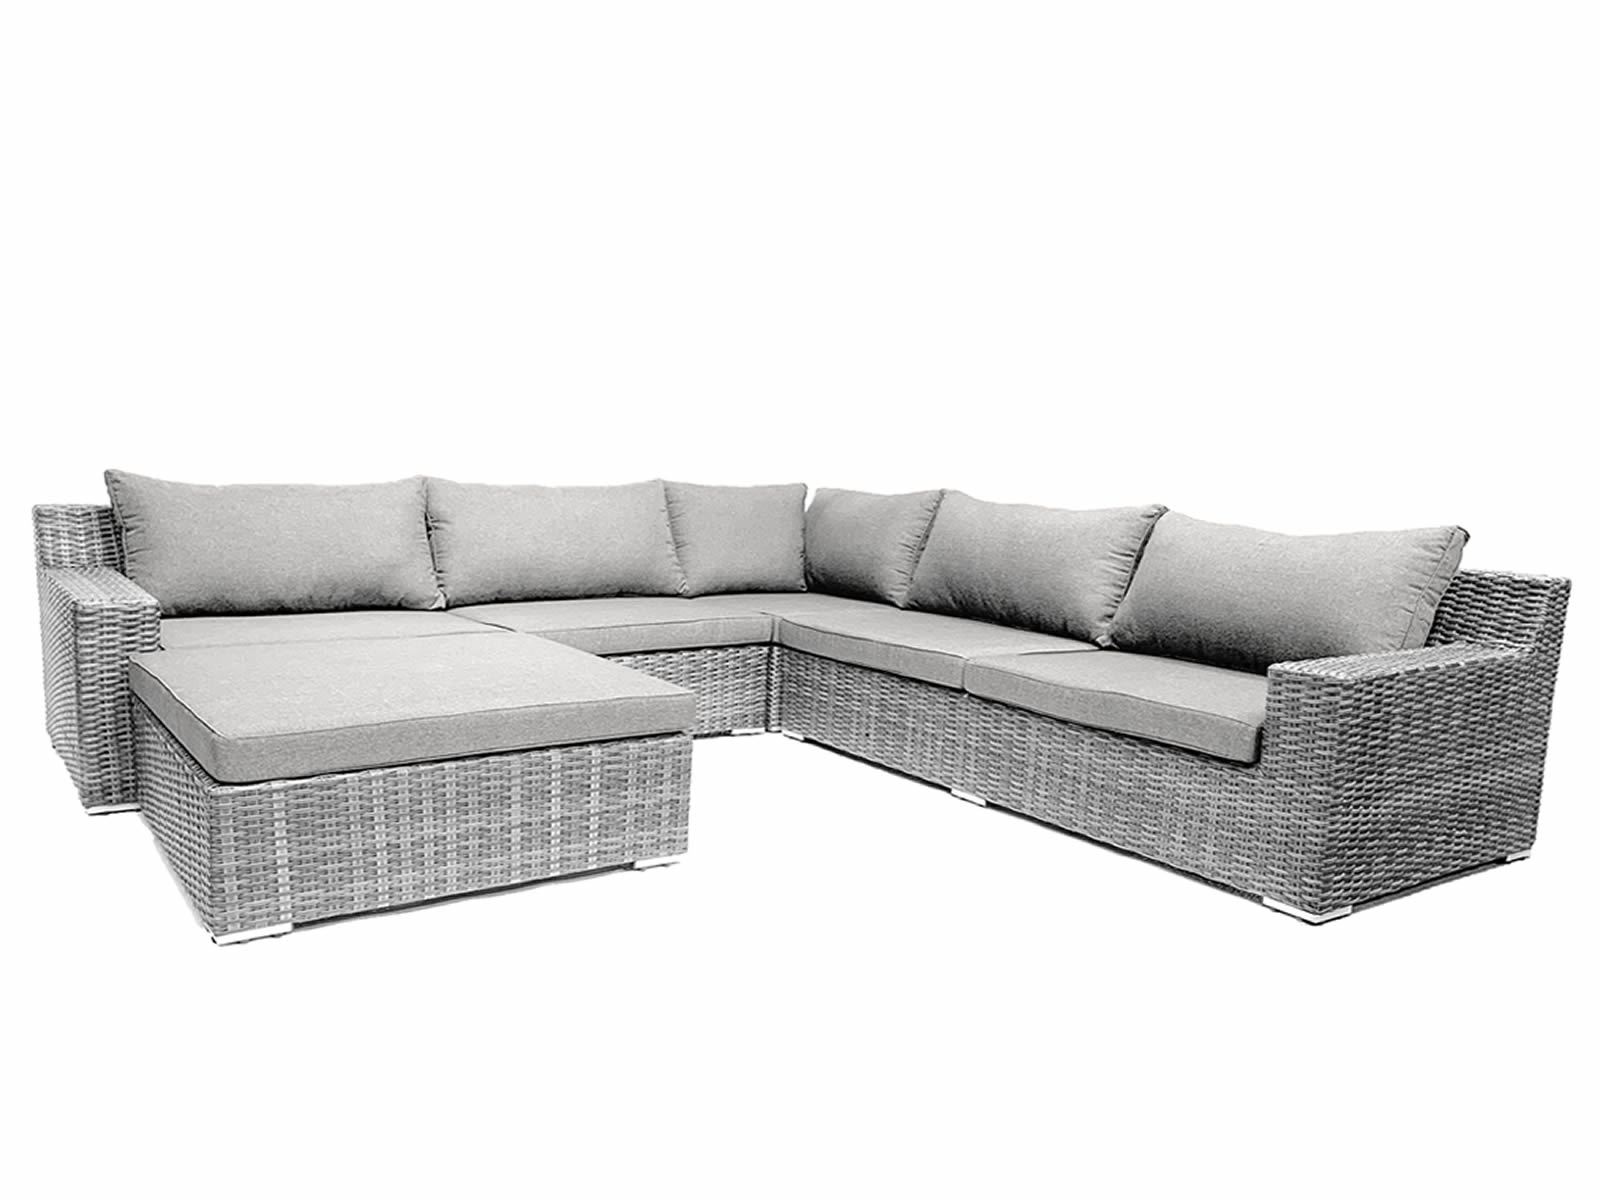 7-person lounge set Colorado Blended Gray with beige cushions | Garden |  Garden Furniture - Yellow Webshop